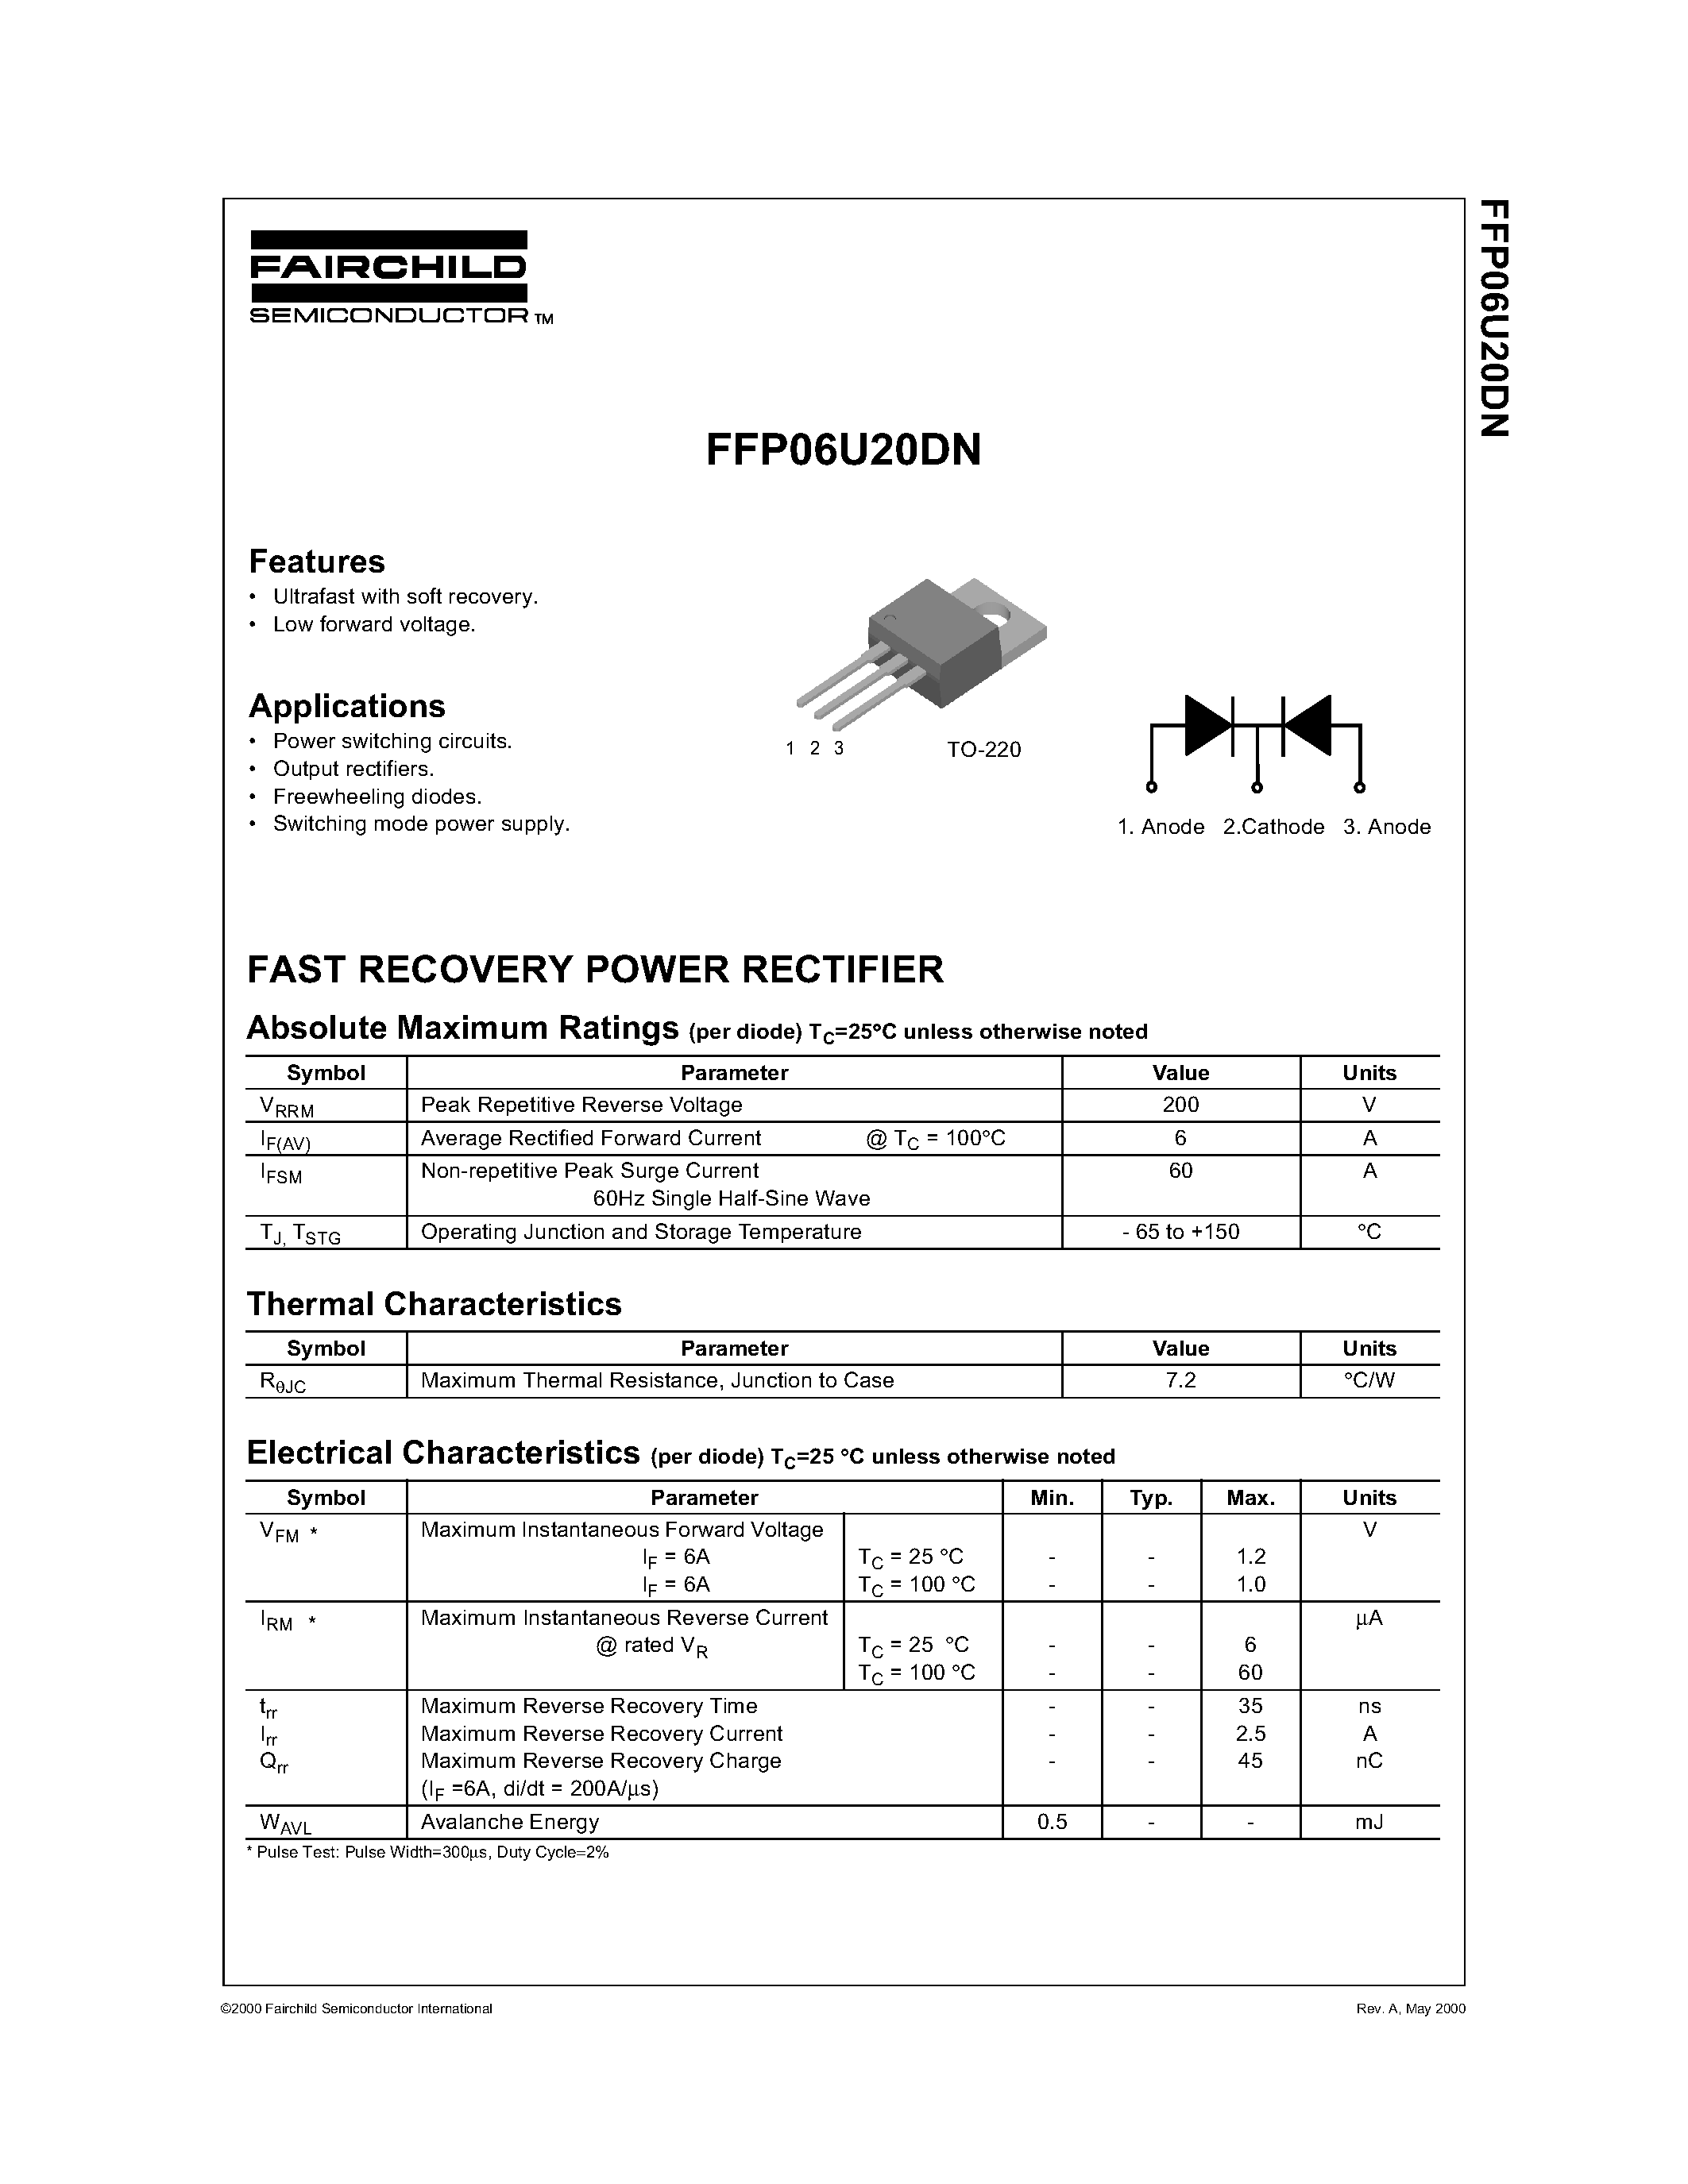 Datasheet FFP06U20DN - FAST RECOVERY POWER RECTIFIER page 1